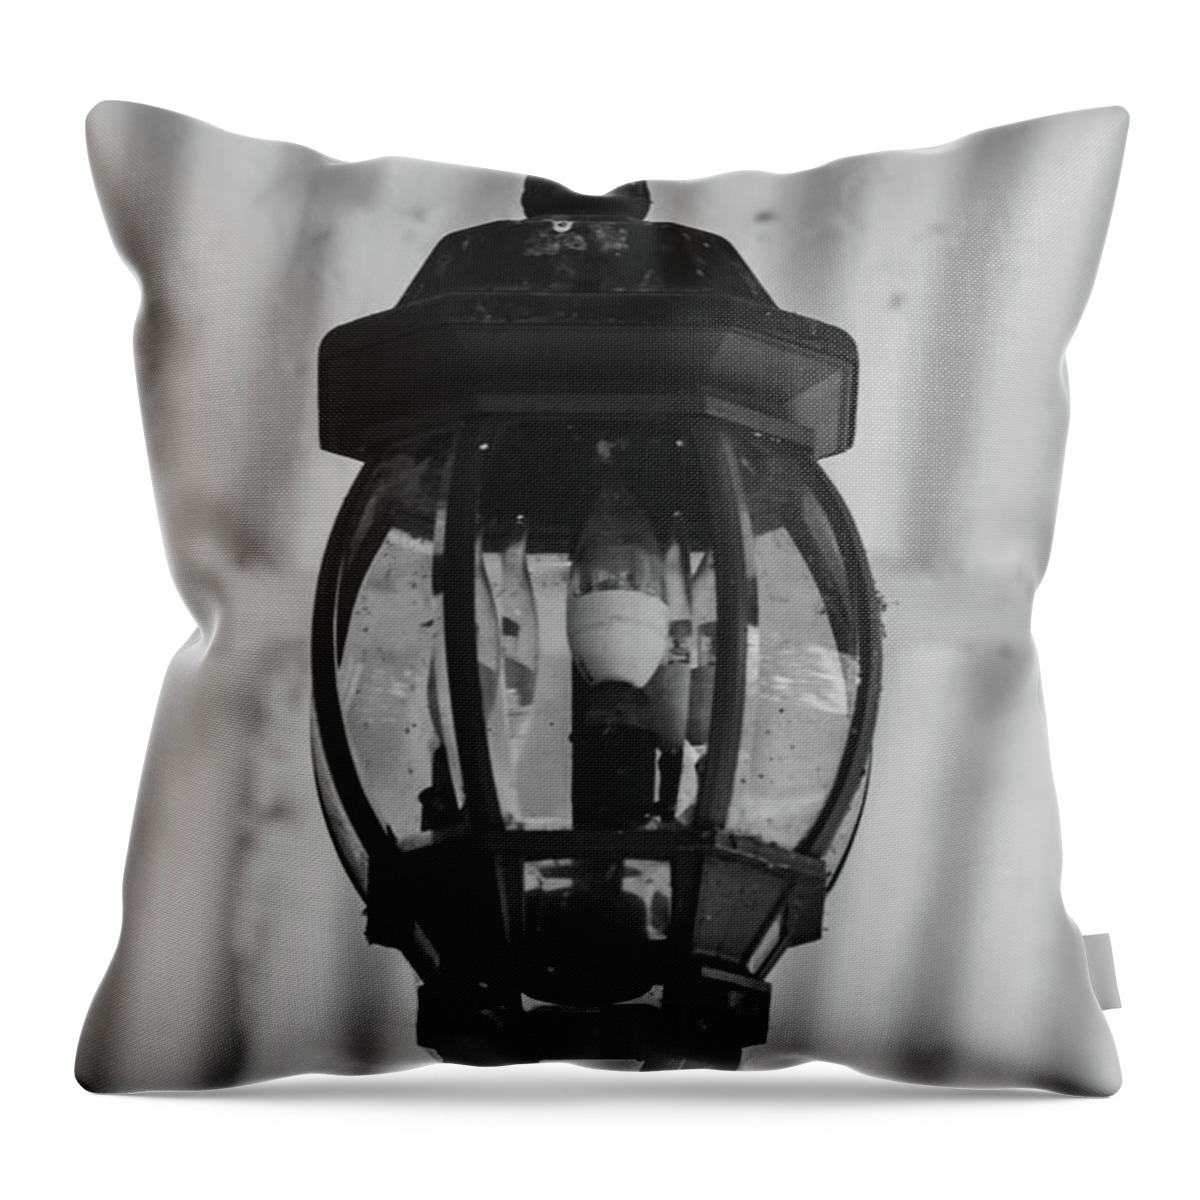 Photograph Throw Pillow featuring the photograph Antique Light by Kelly Thackeray